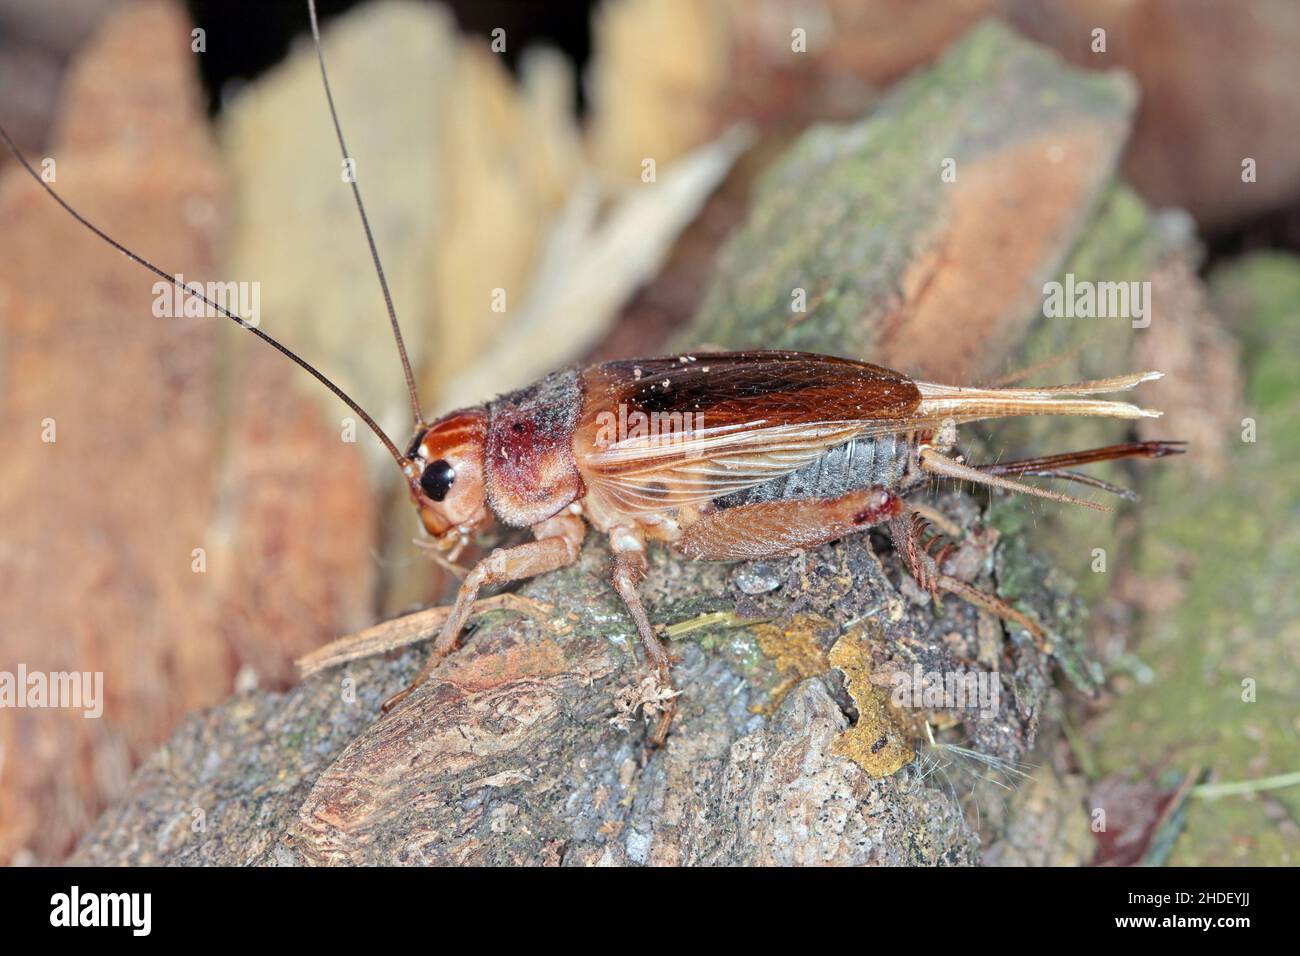 Close up House cricket (Acheta domestica). The pest is often found in homes. Stock Photo